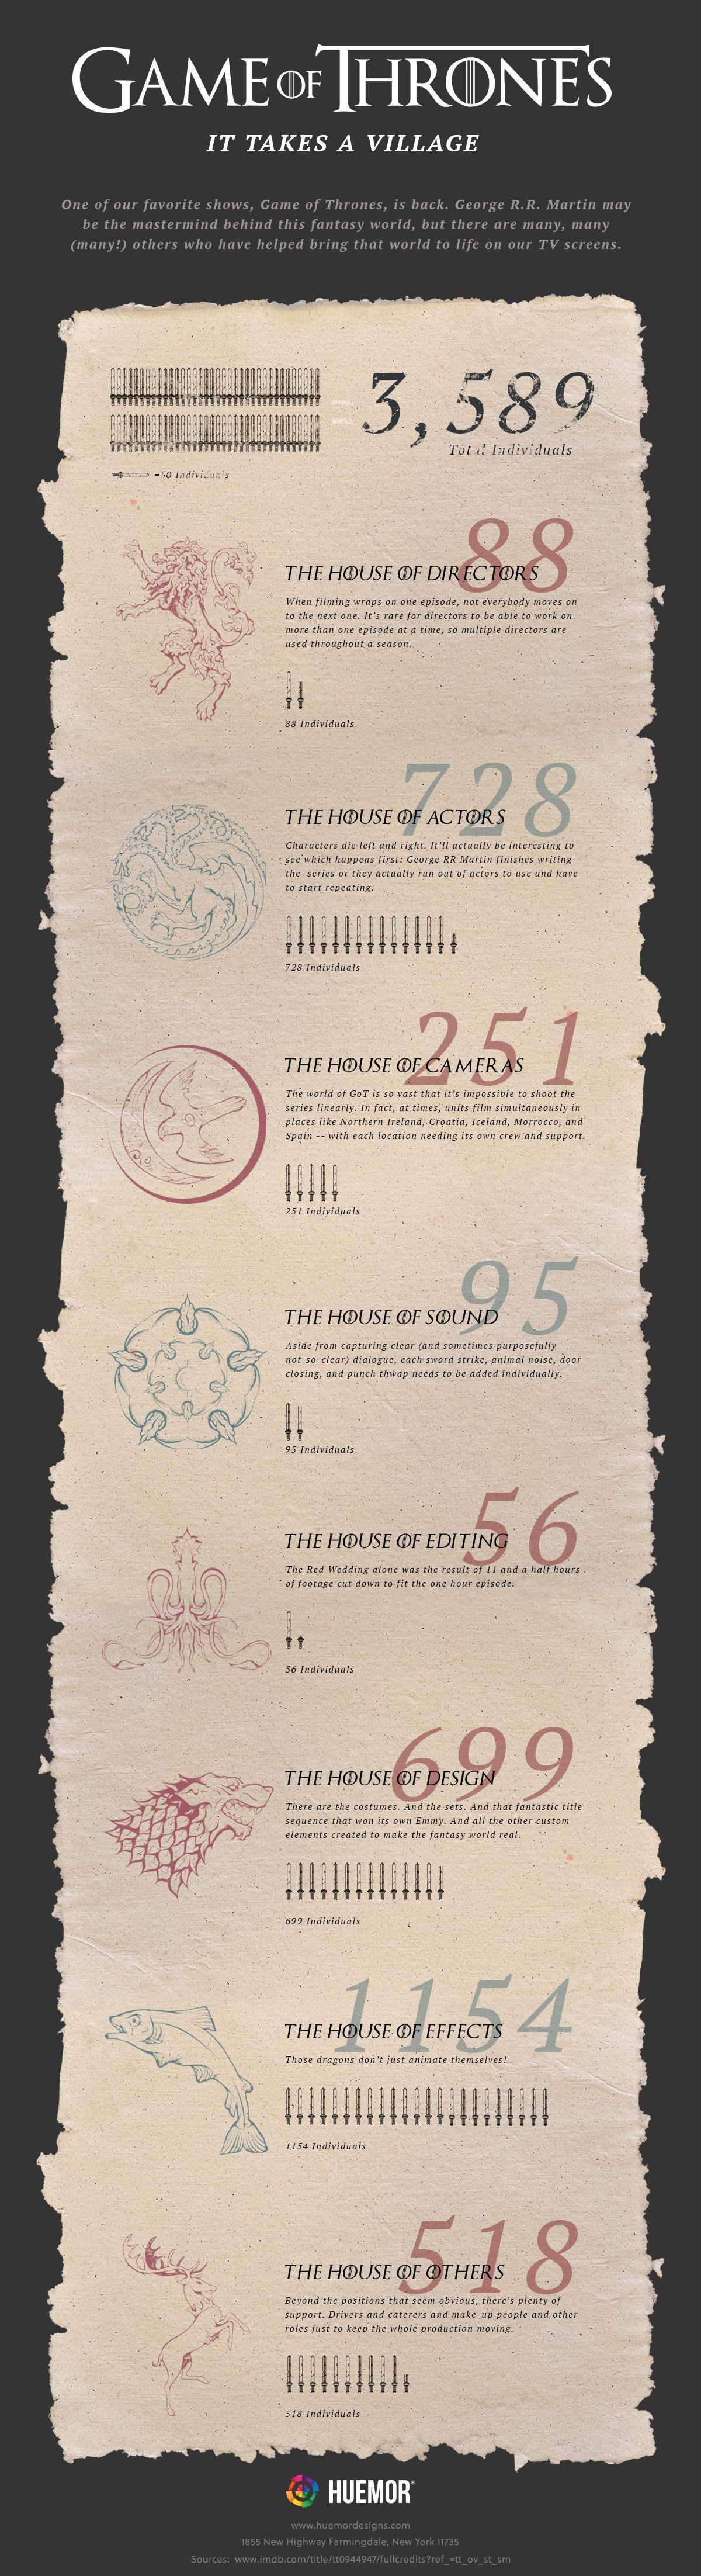 Game Of Thrones Infographic